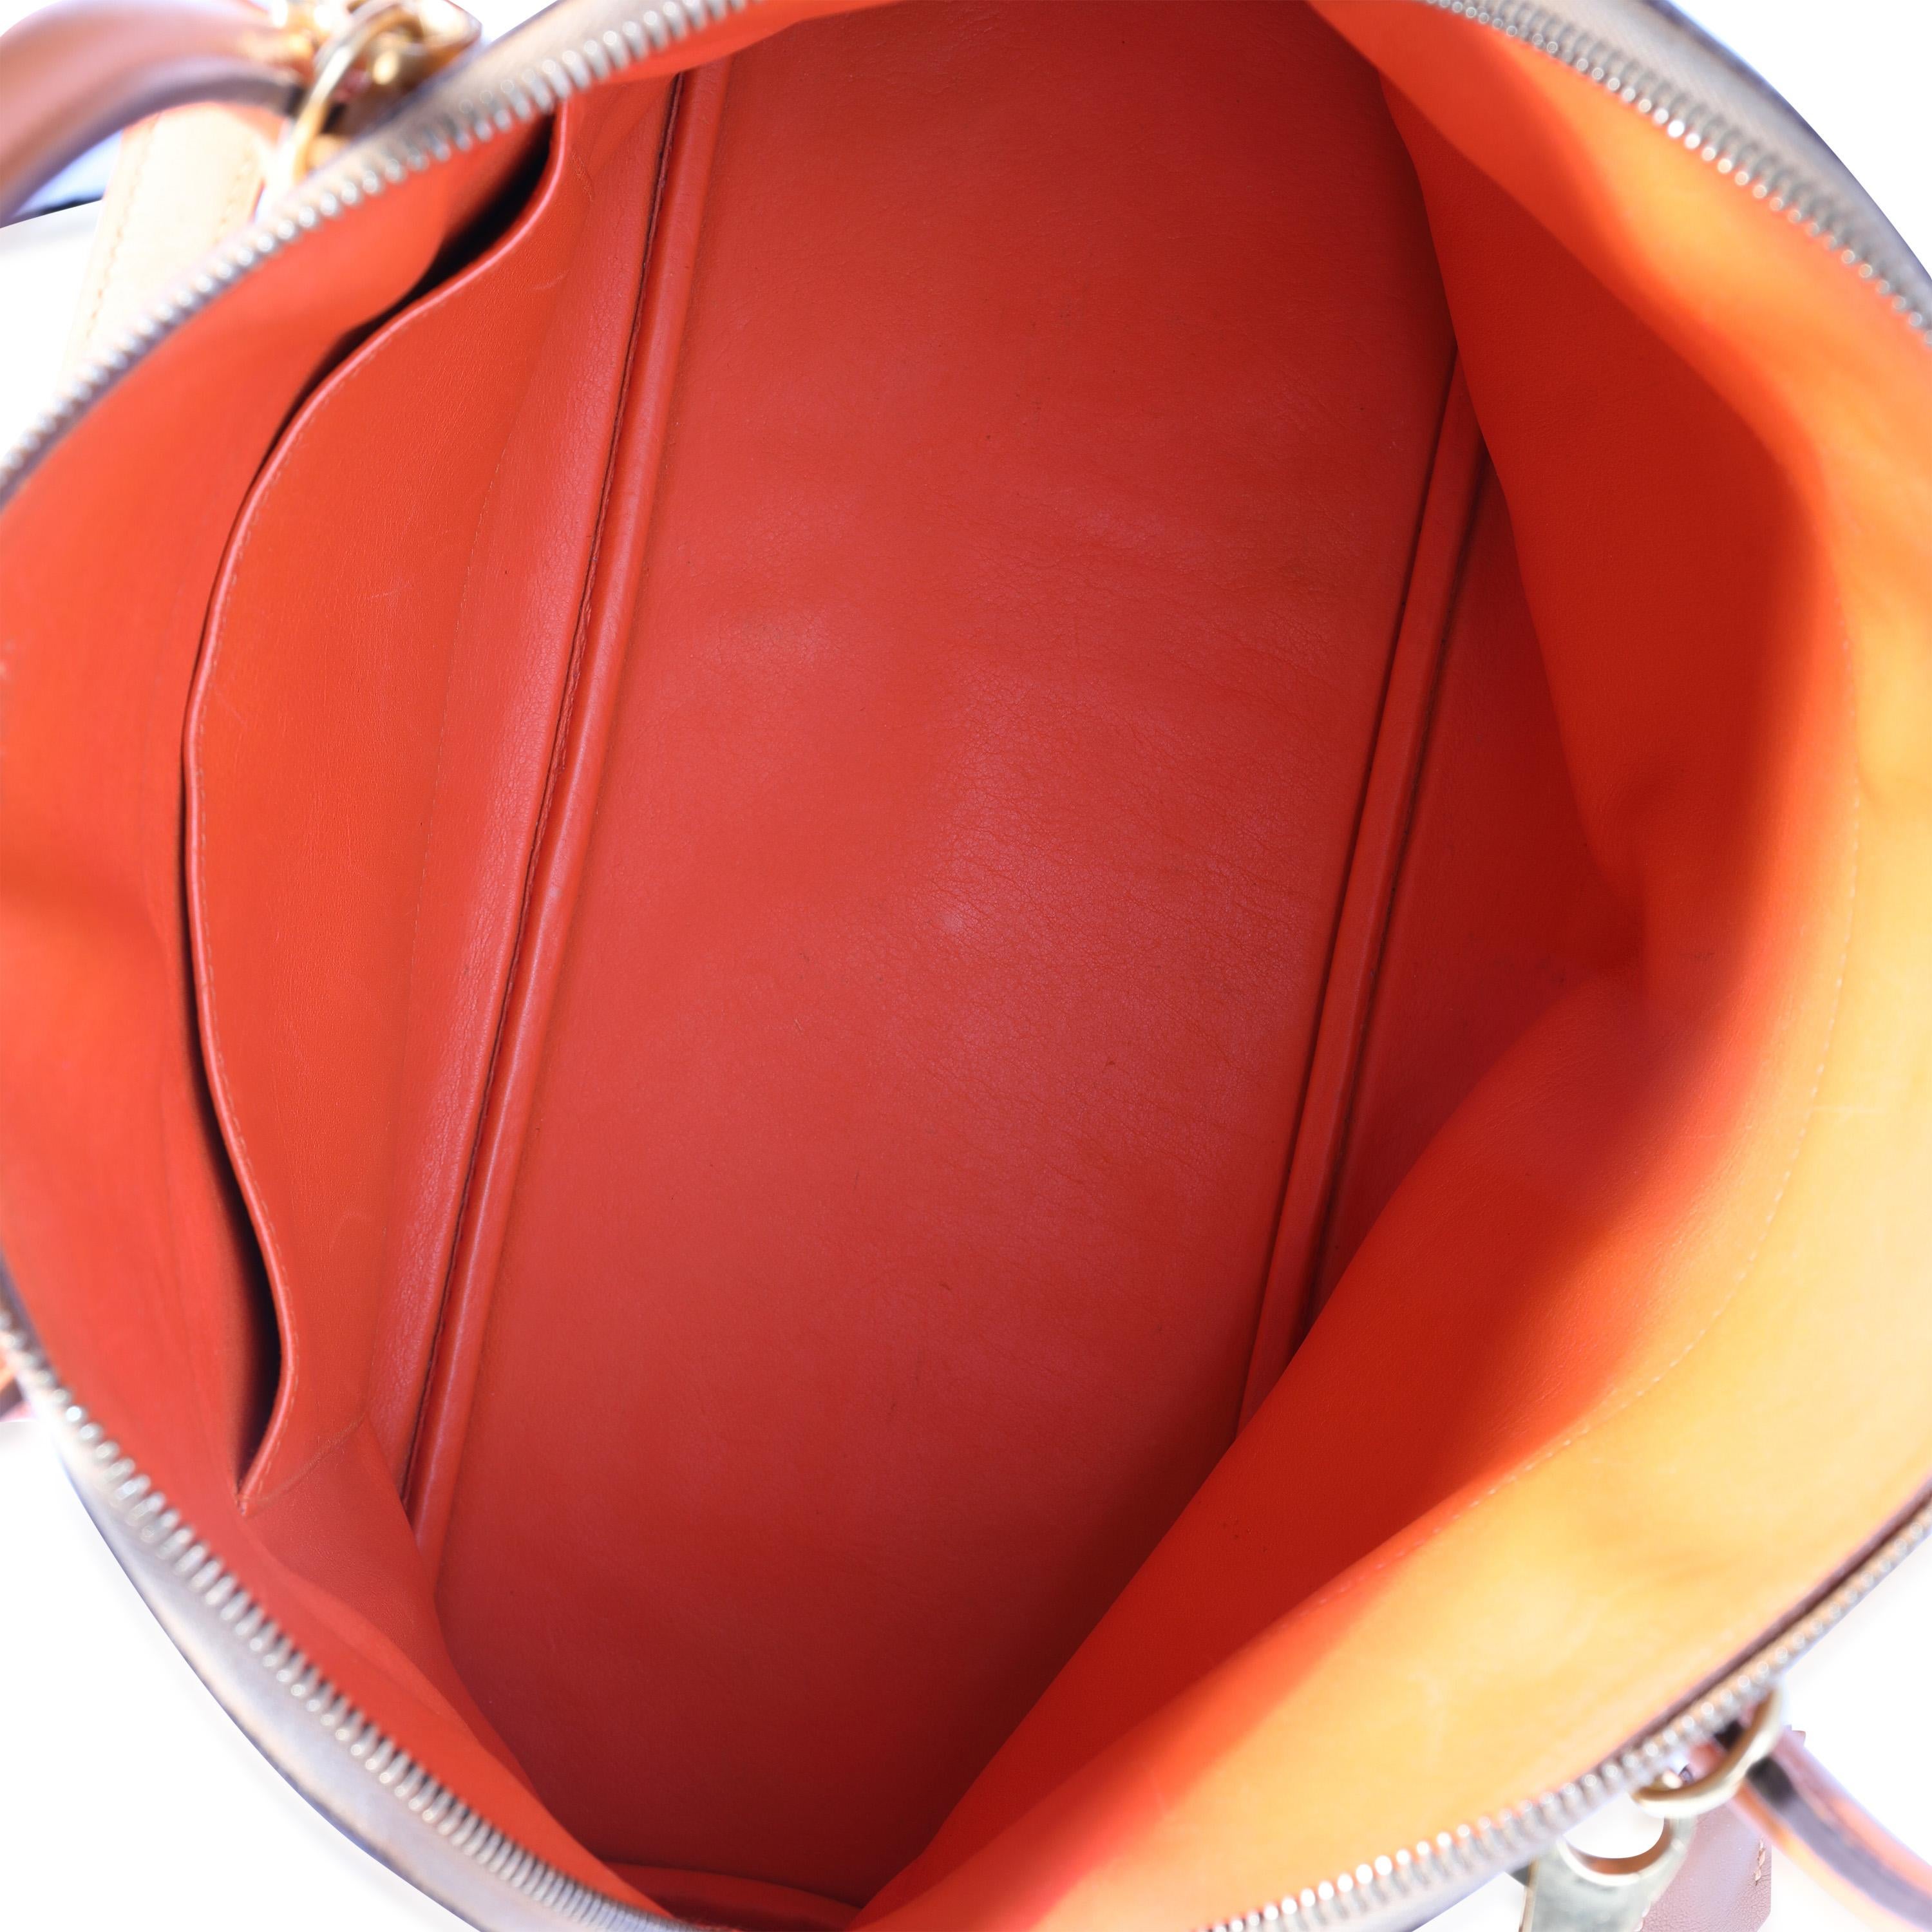 Listing Title: Hermès Fauve & Feu Barenia Bolide 35 GHW
SKU: 117669
Condition: Pre-owned
Handbag Condition: Very Good
Condition Comments: Very Good Condition. Light scuffing to corners. Indentations to base. Light scuffing to exterior. Scratching